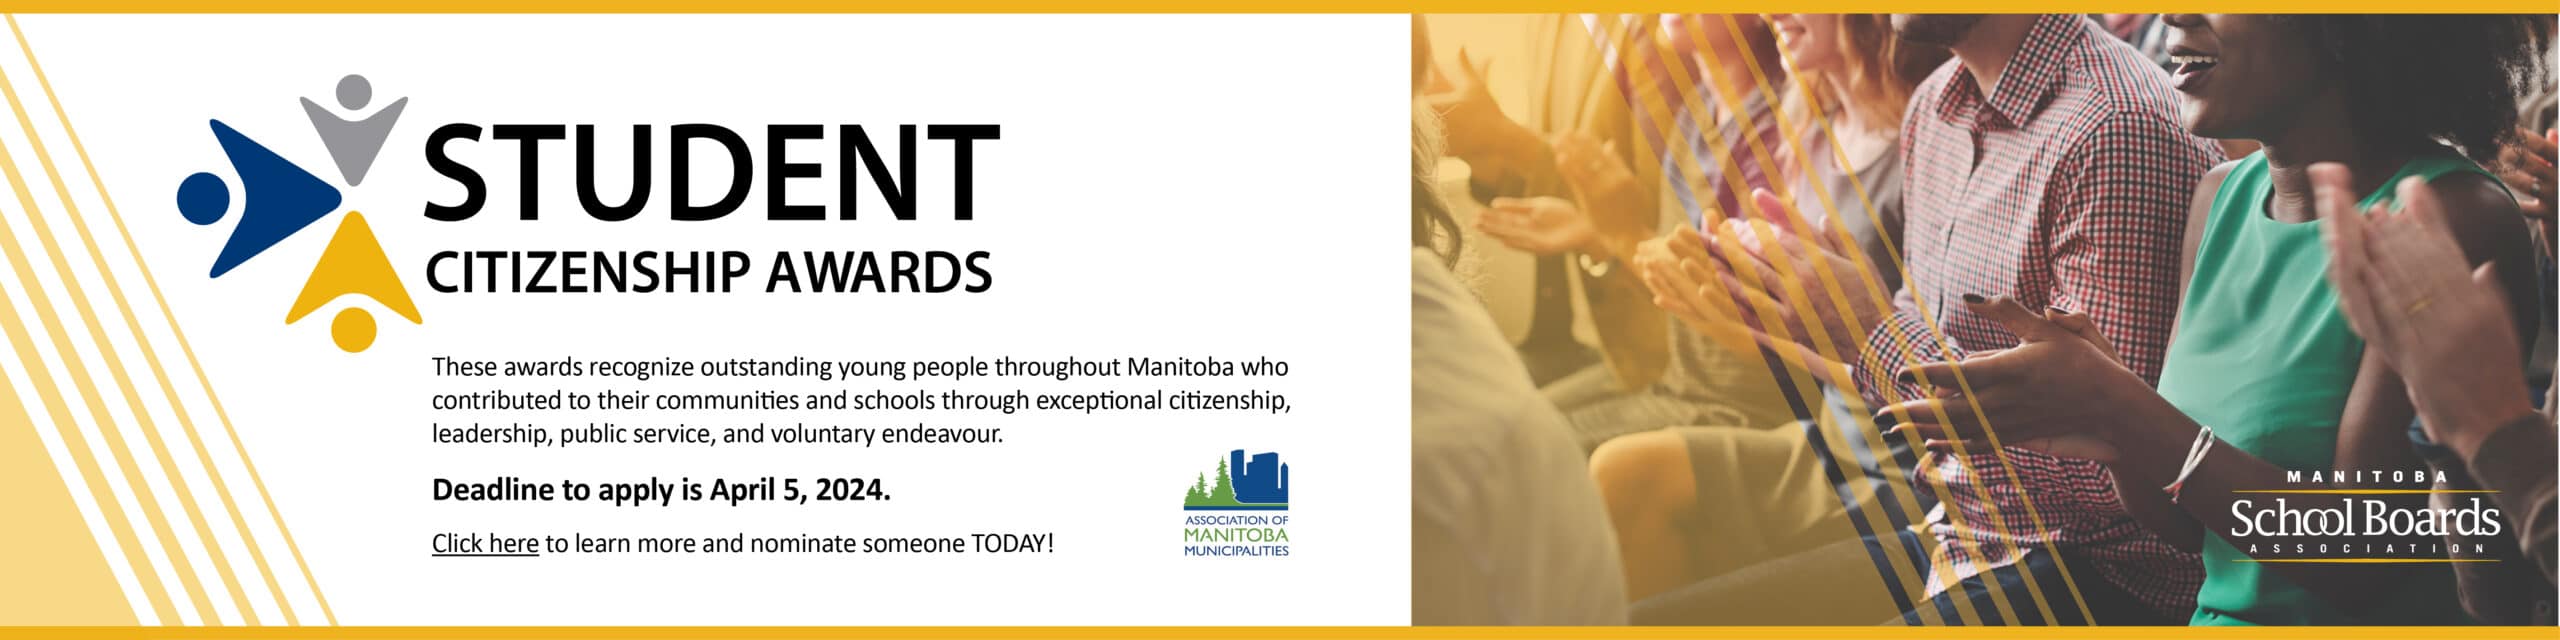 These awards recognize outstanding young people throughout Manitoba who contributed to their communities and schools through exceptional citizenship, leadership, public service, and voluntary endeavour. Deadline to apply is April 5, 2024. Click here to learn more and nominate someone TODAY!